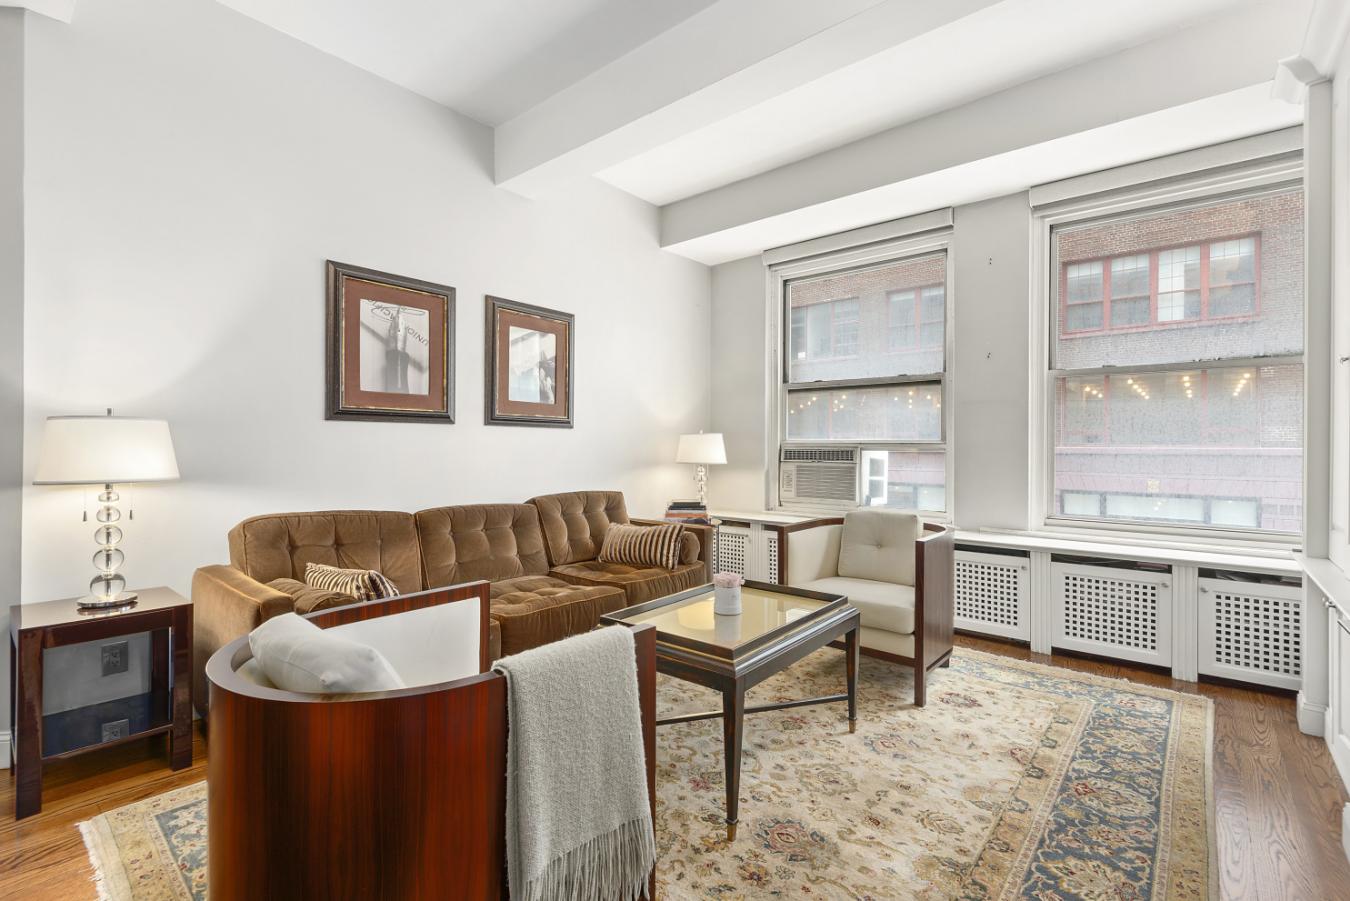 425 Park Avenue S NoMad, Manhattan, New York, 10016, United States, 1 Bedroom Bedrooms, ,1 BathroomBathrooms,Residential,For Sale,425 Park Avenue S NoMad,794984